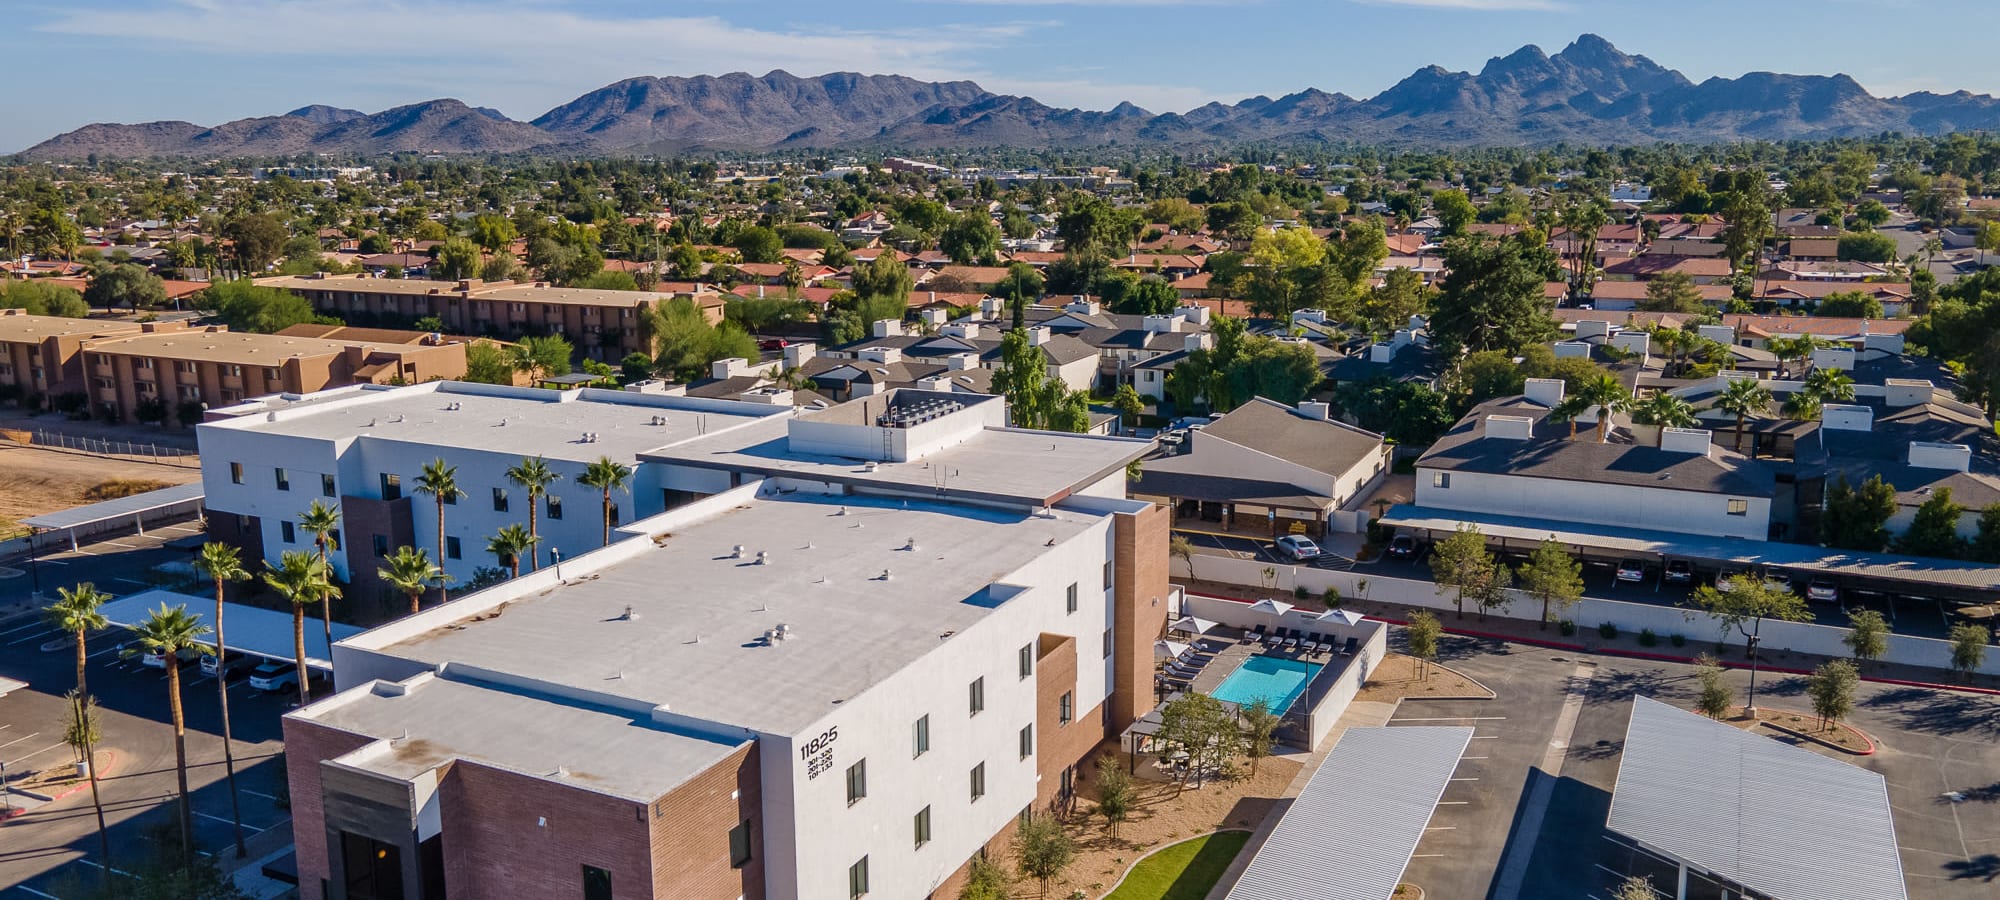 View of the building and the covered parking spots at The Charleston Apartments in Phoenix, Arizona